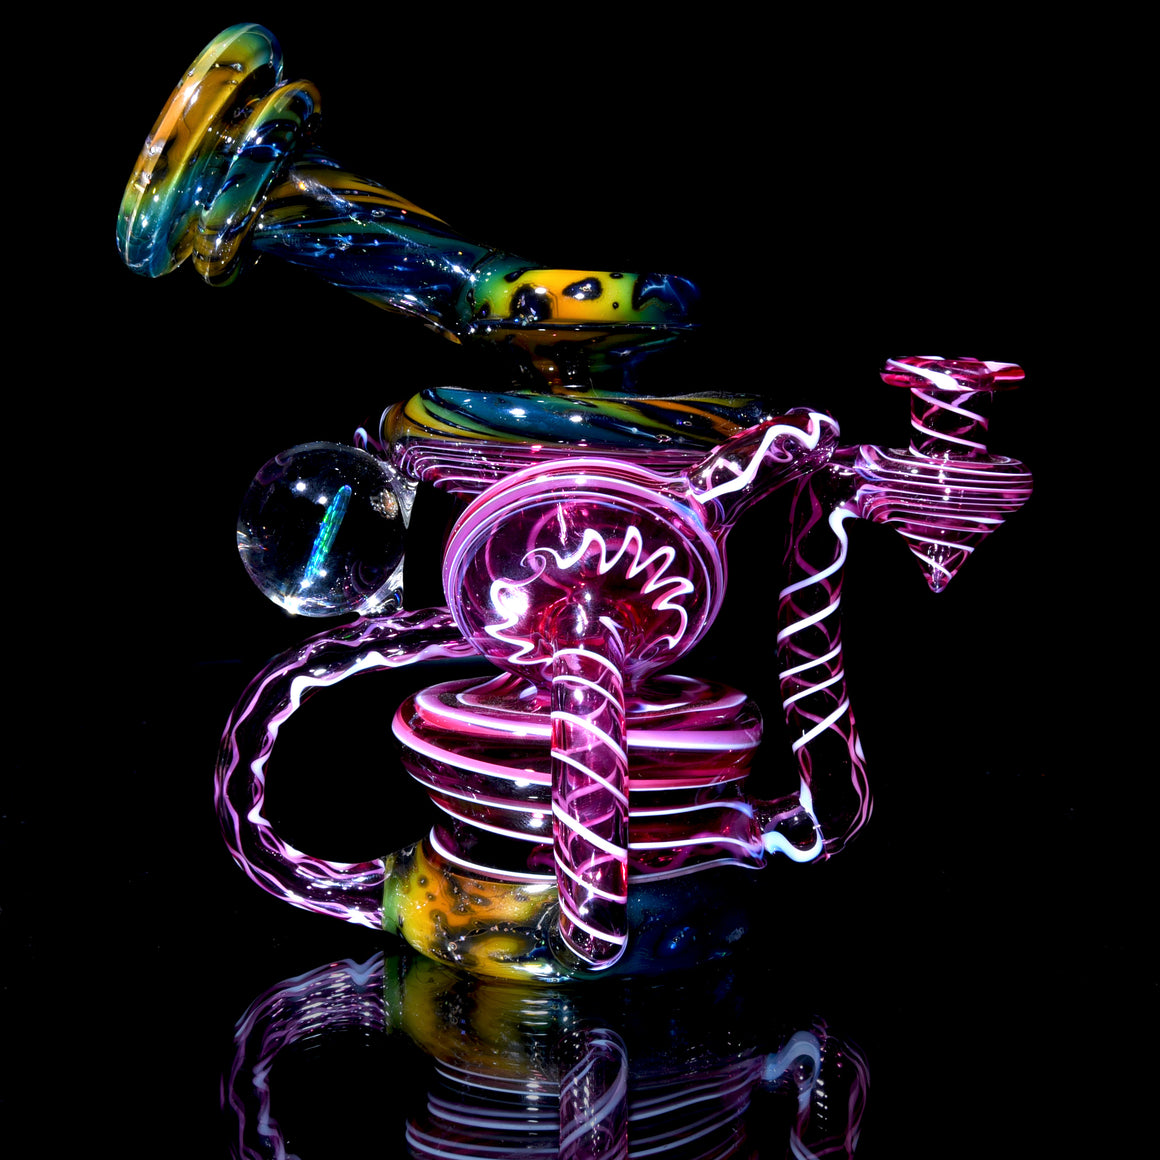 Crushed Opal Fume/Gold Ruby over Gold Amethyst & Lotus White Swirl Double Disk Triple Drain Recycler - 10mm Female